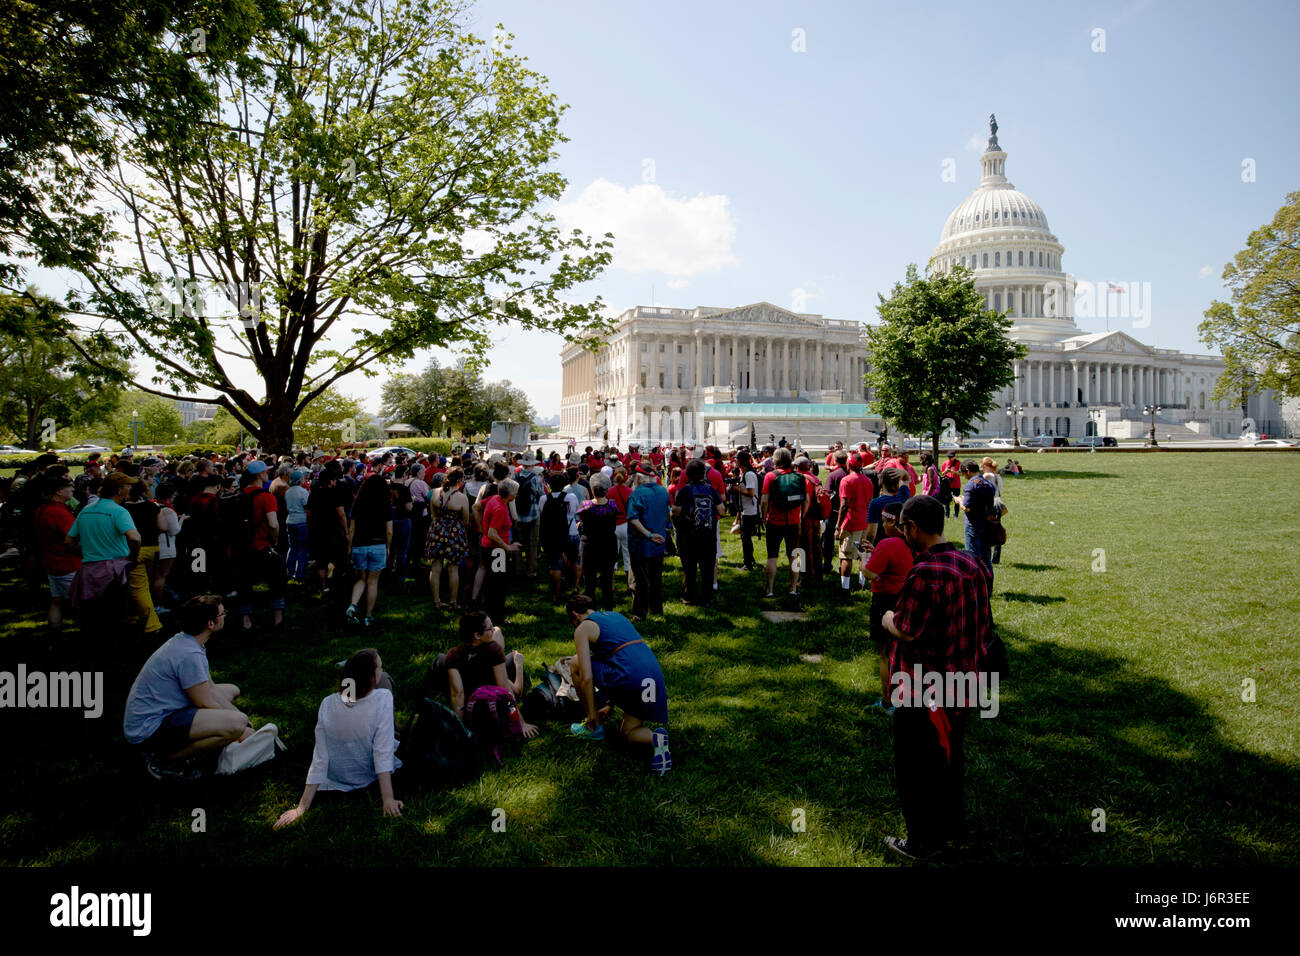 protest group in the grounds of the United States Capitol building Washington DC USA Stock Photo